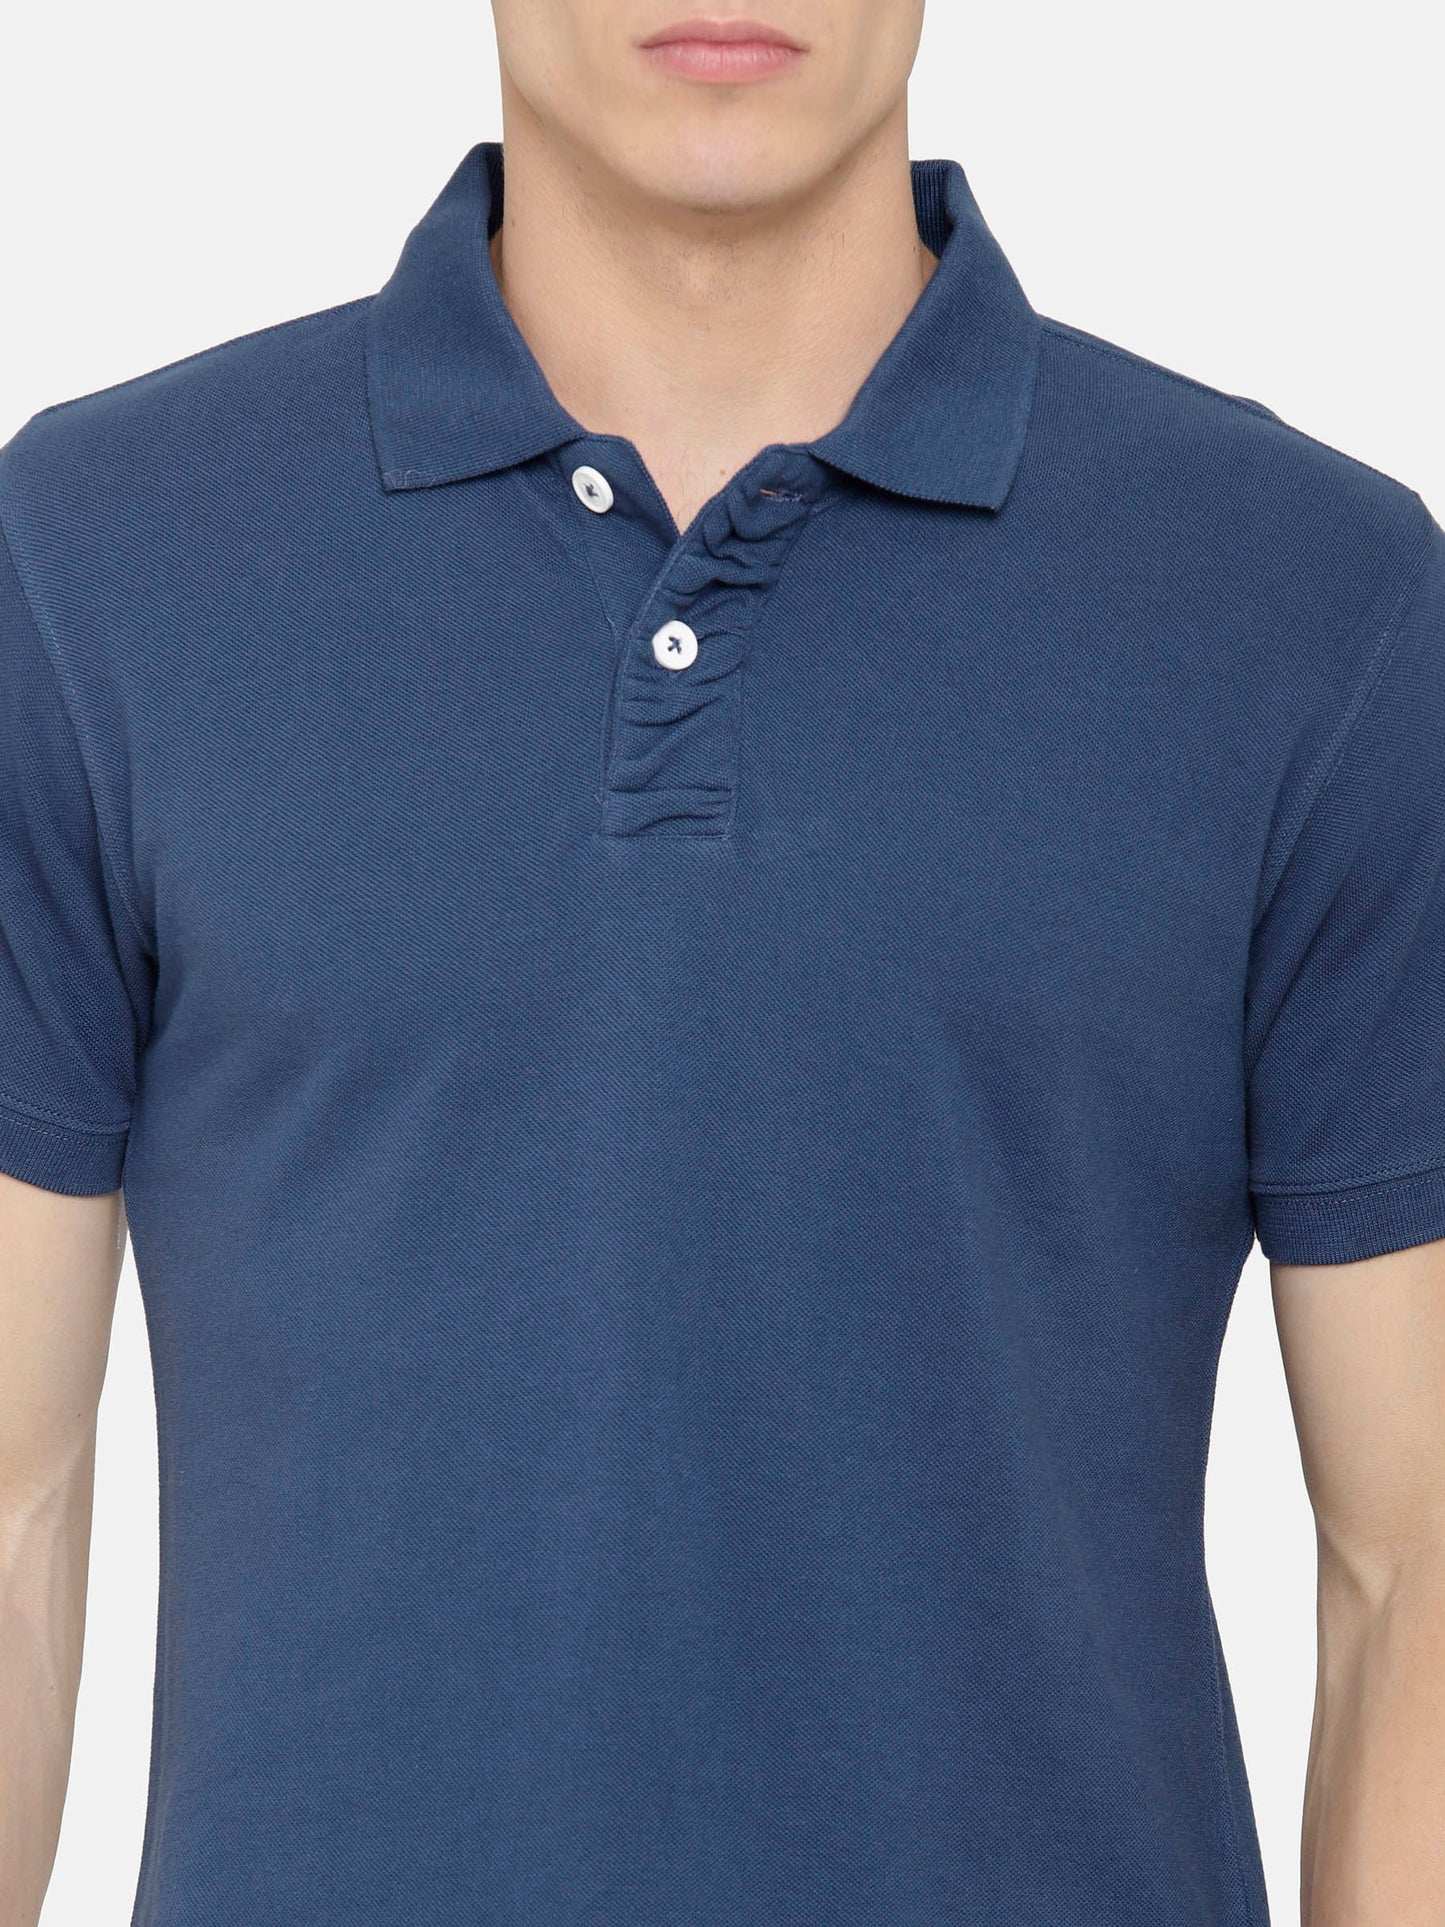 Teal Blue color polo T-Shirt